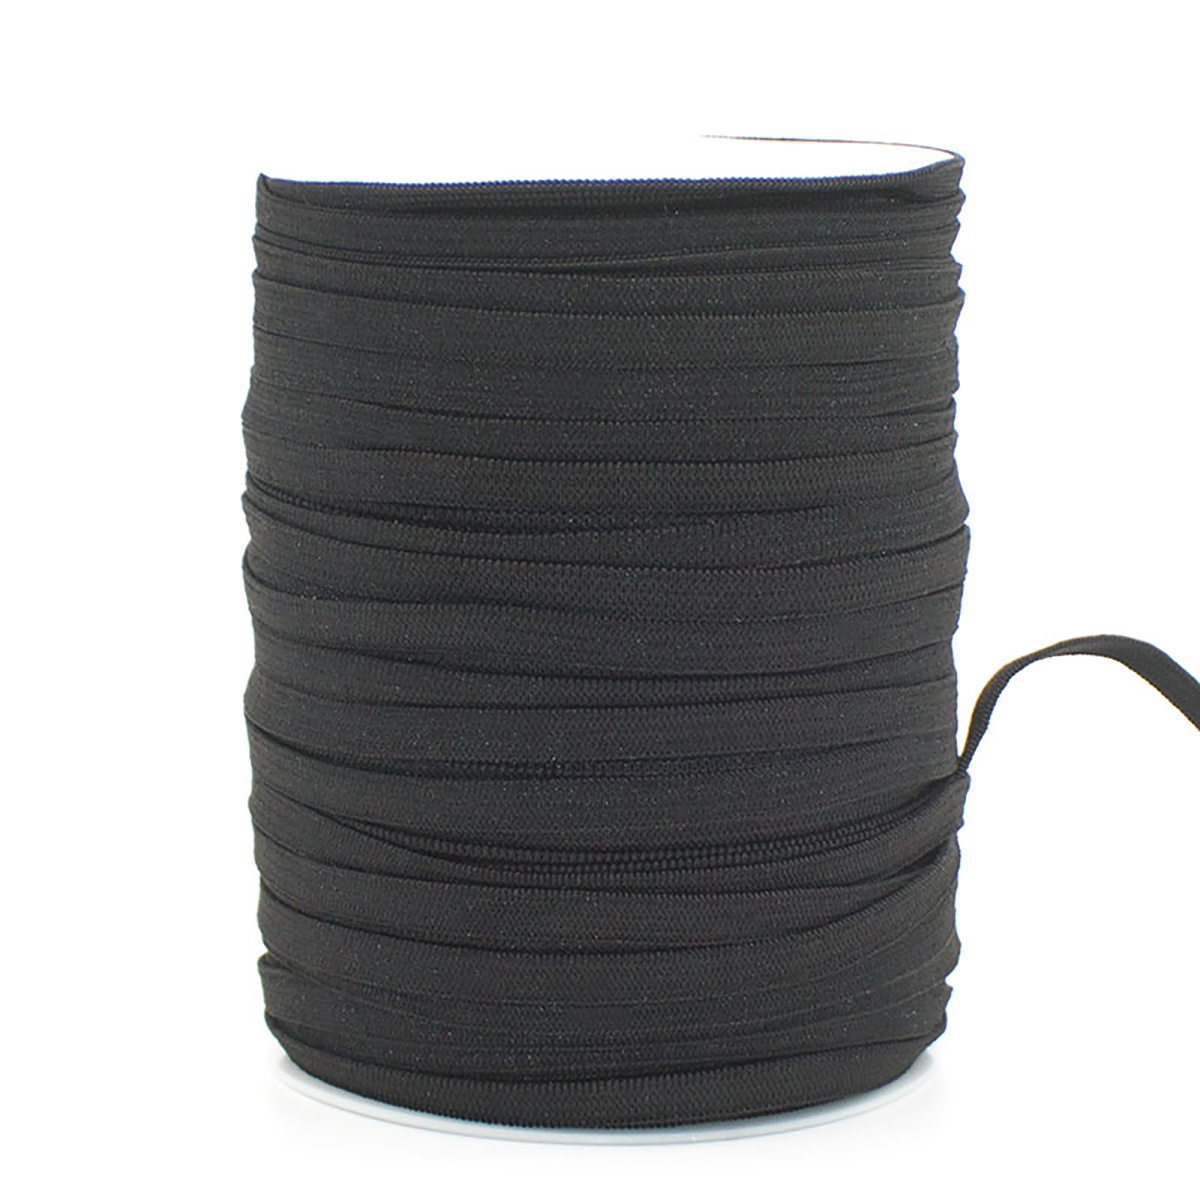 356mm-Elastic-Band-Cord-Knits-100-Meter-Length-Mouth-Hat-Stretch-DIY-Sewing-1701161-9